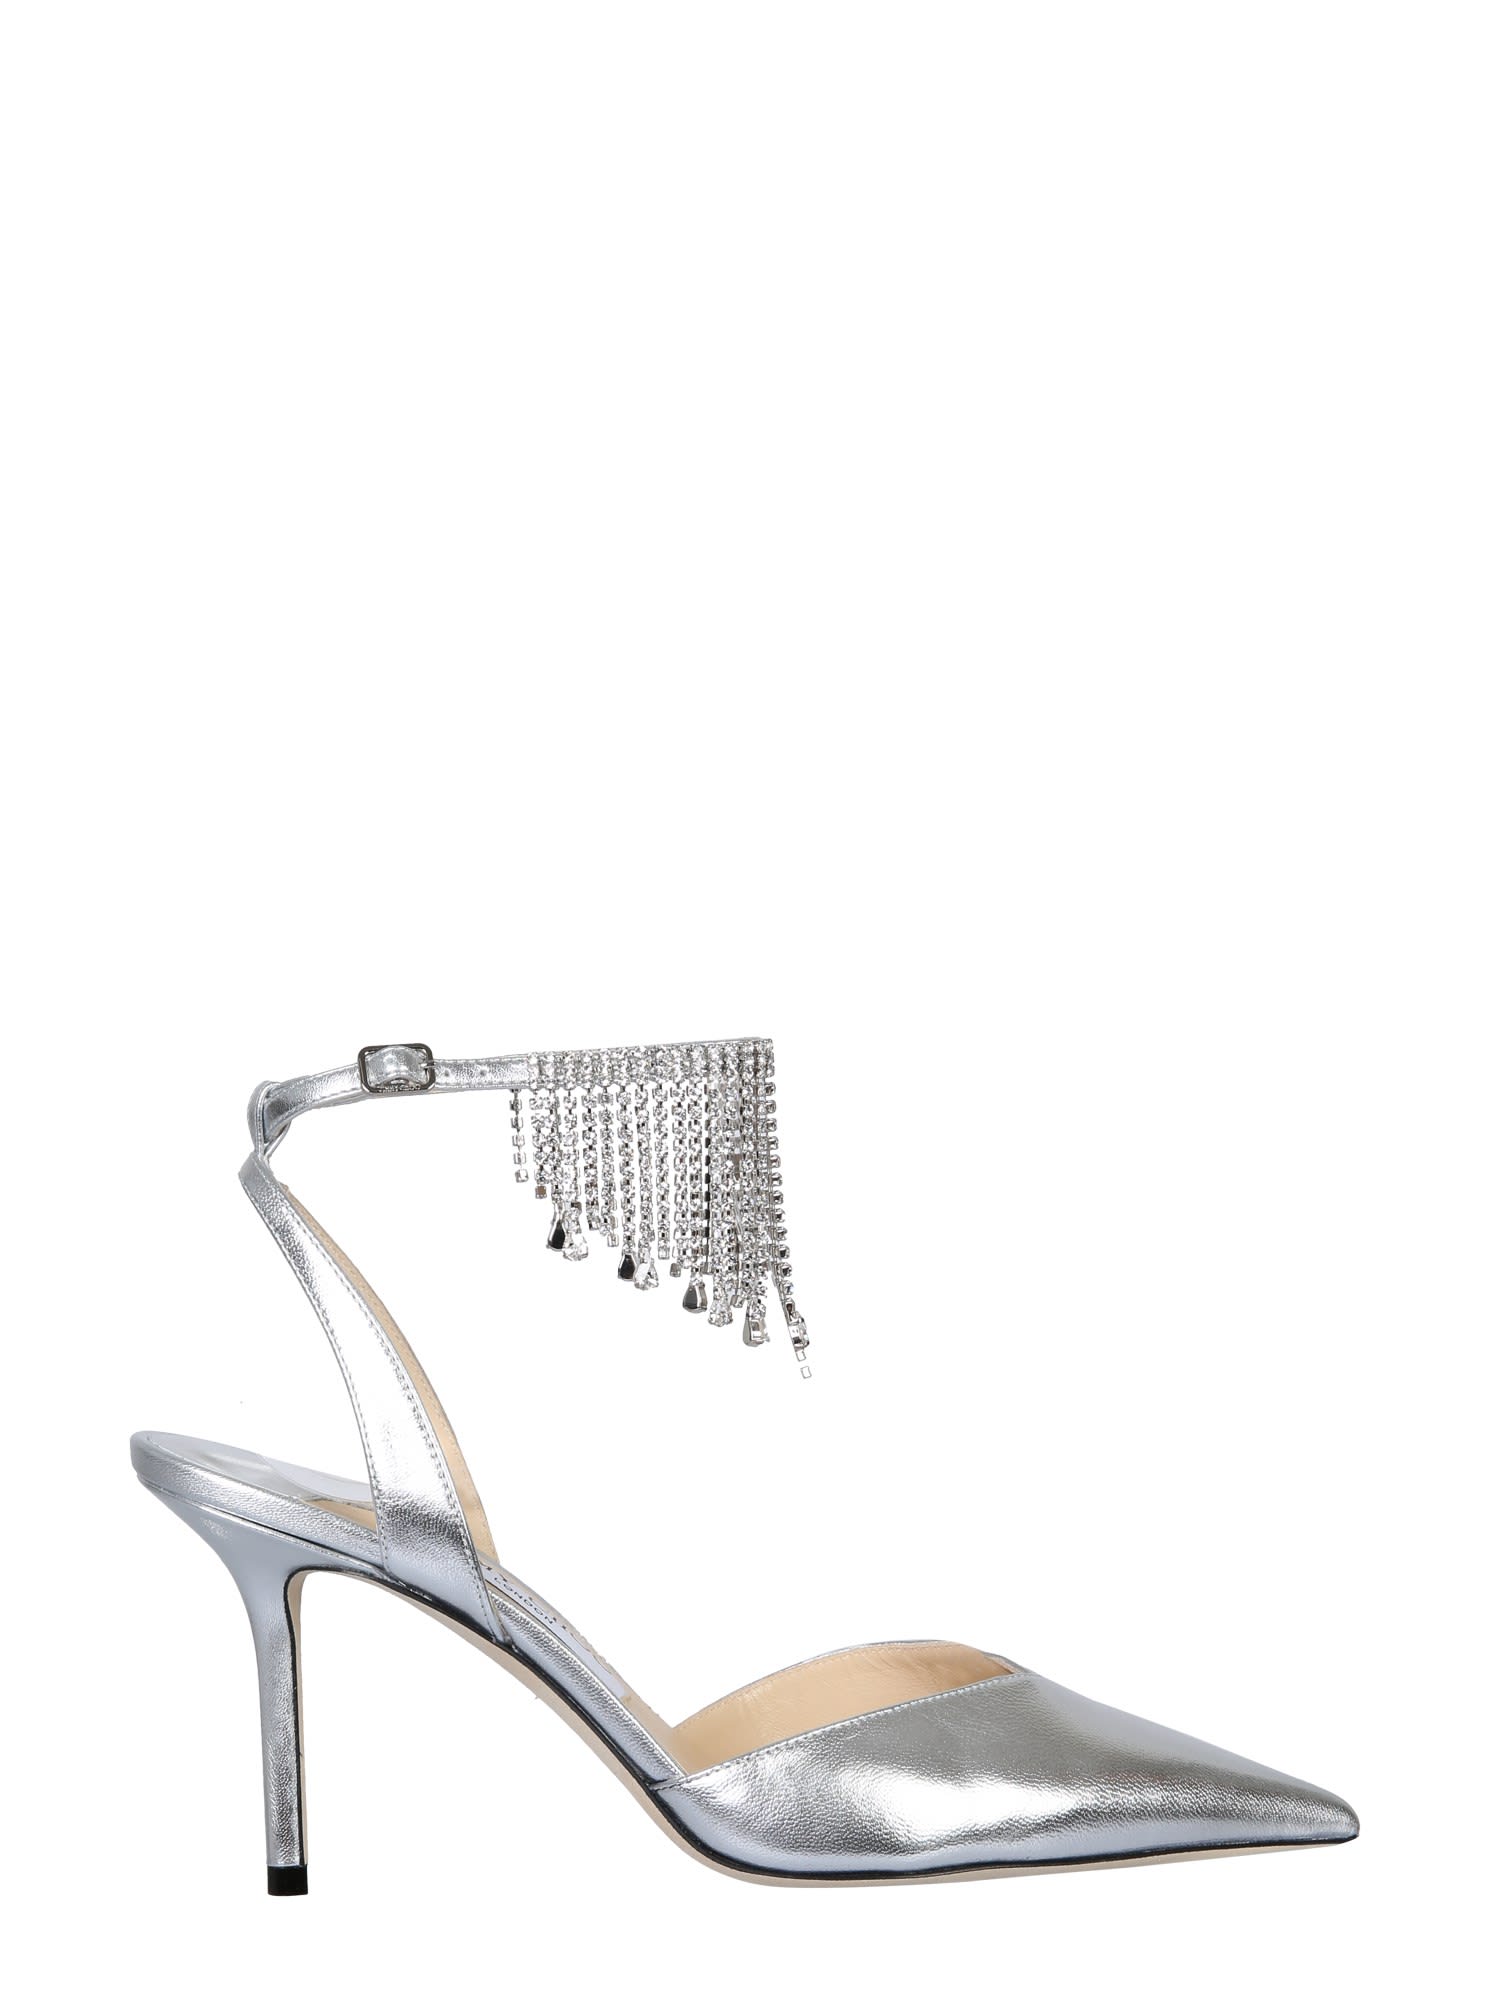 Buy Jimmy Choo Birtie Pumps online, shop Jimmy Choo shoes with free shipping